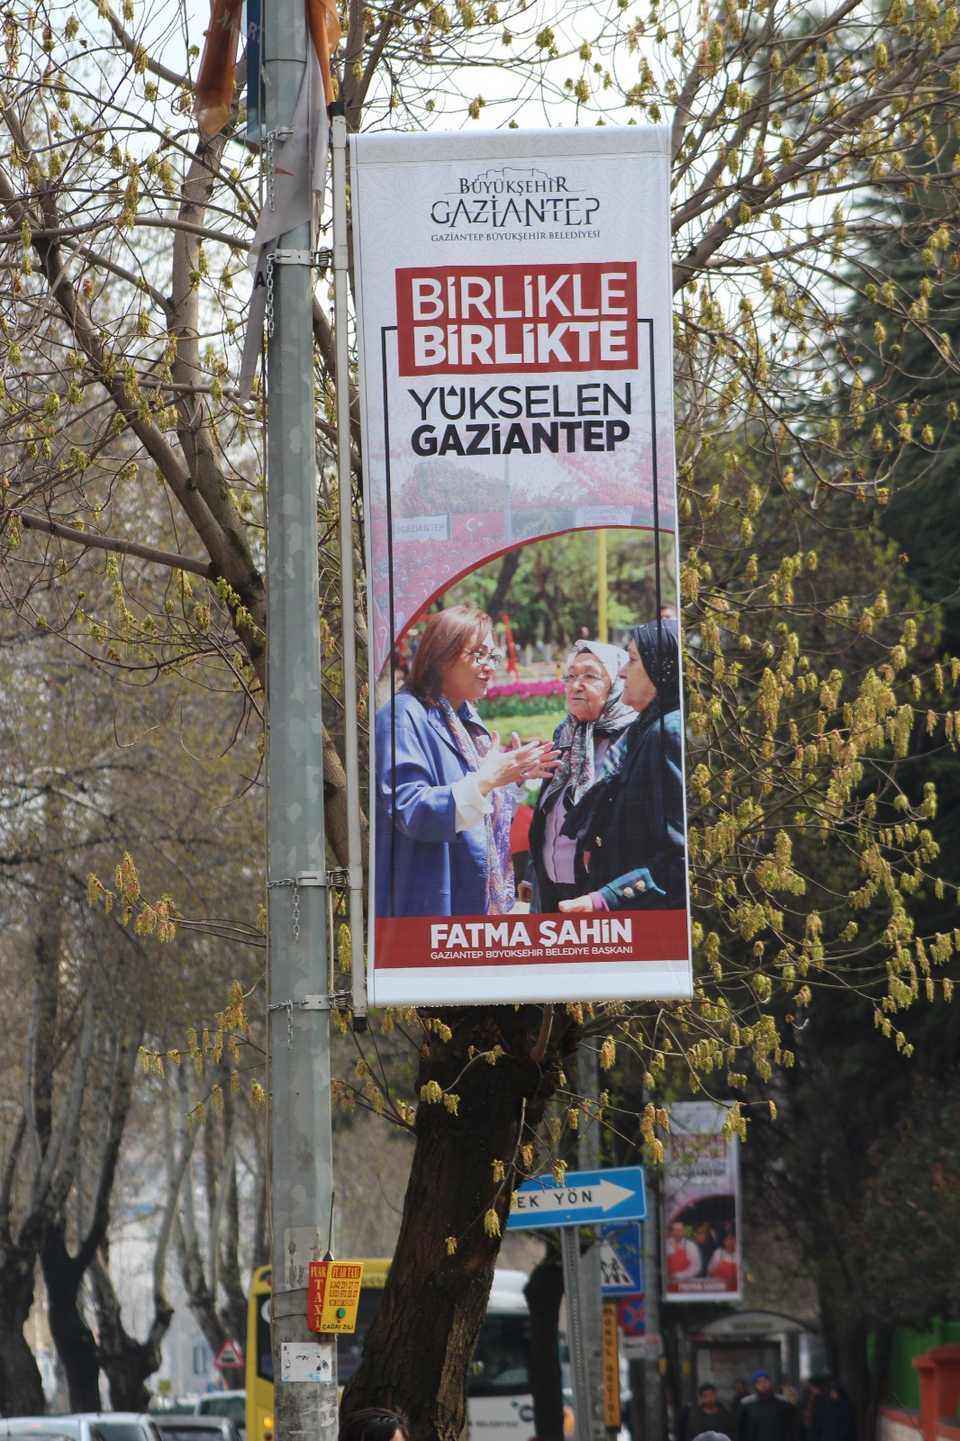 Poster of AK Party candidate Fatma Şahin for Gaziantep.